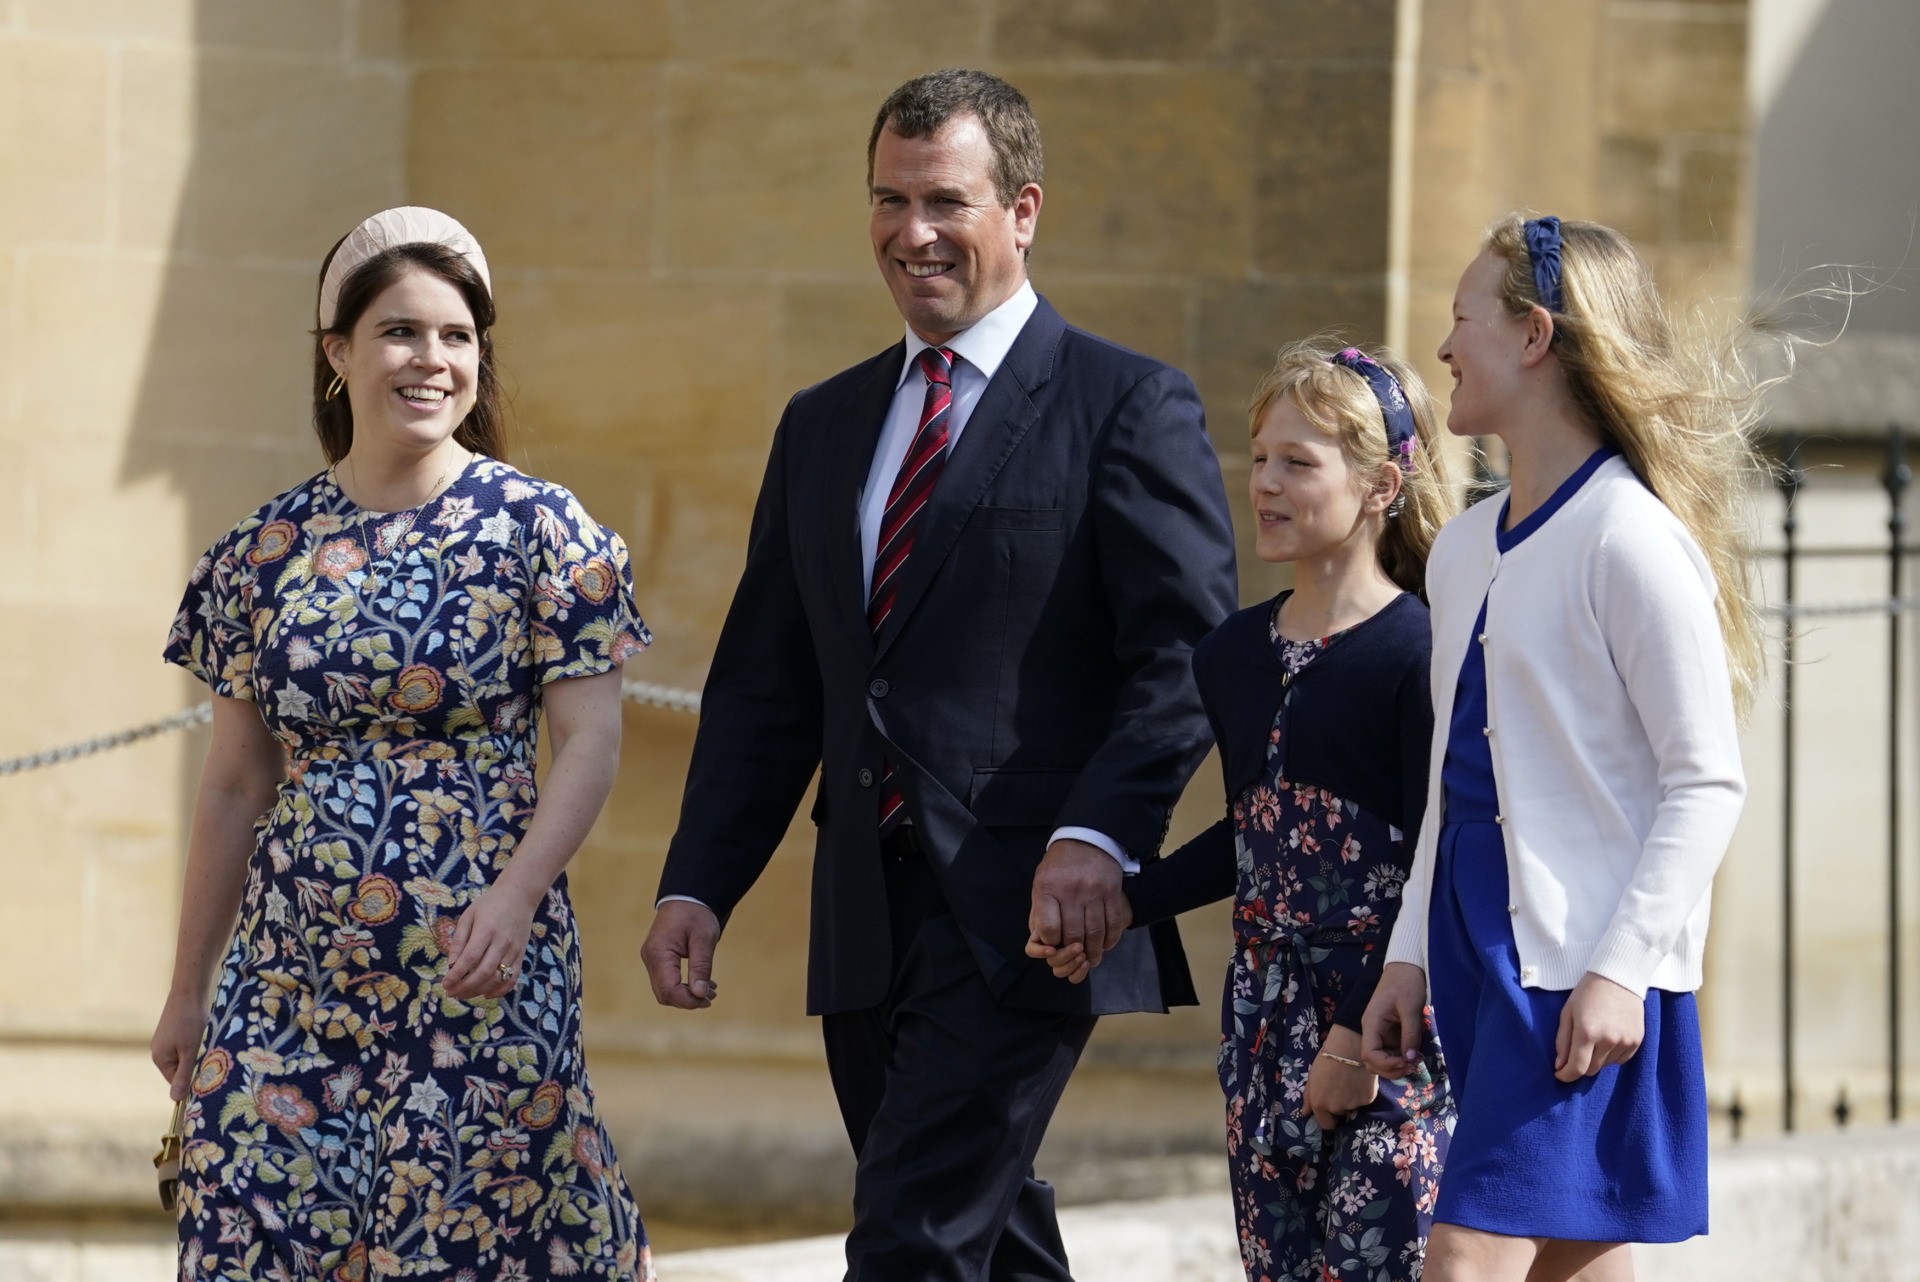 WINDSOR, ENGLAND - APRIL 17: Princess Eugenie, Peter Philips and his daughters Isla Philips and Savannah Philips attend the Easter Matins Service at St George's Chapel at Windsor Castle on April 17, 2022 in Windsor, England. (Photo by Andrew Matthews-WPA Pool/Getty Images)